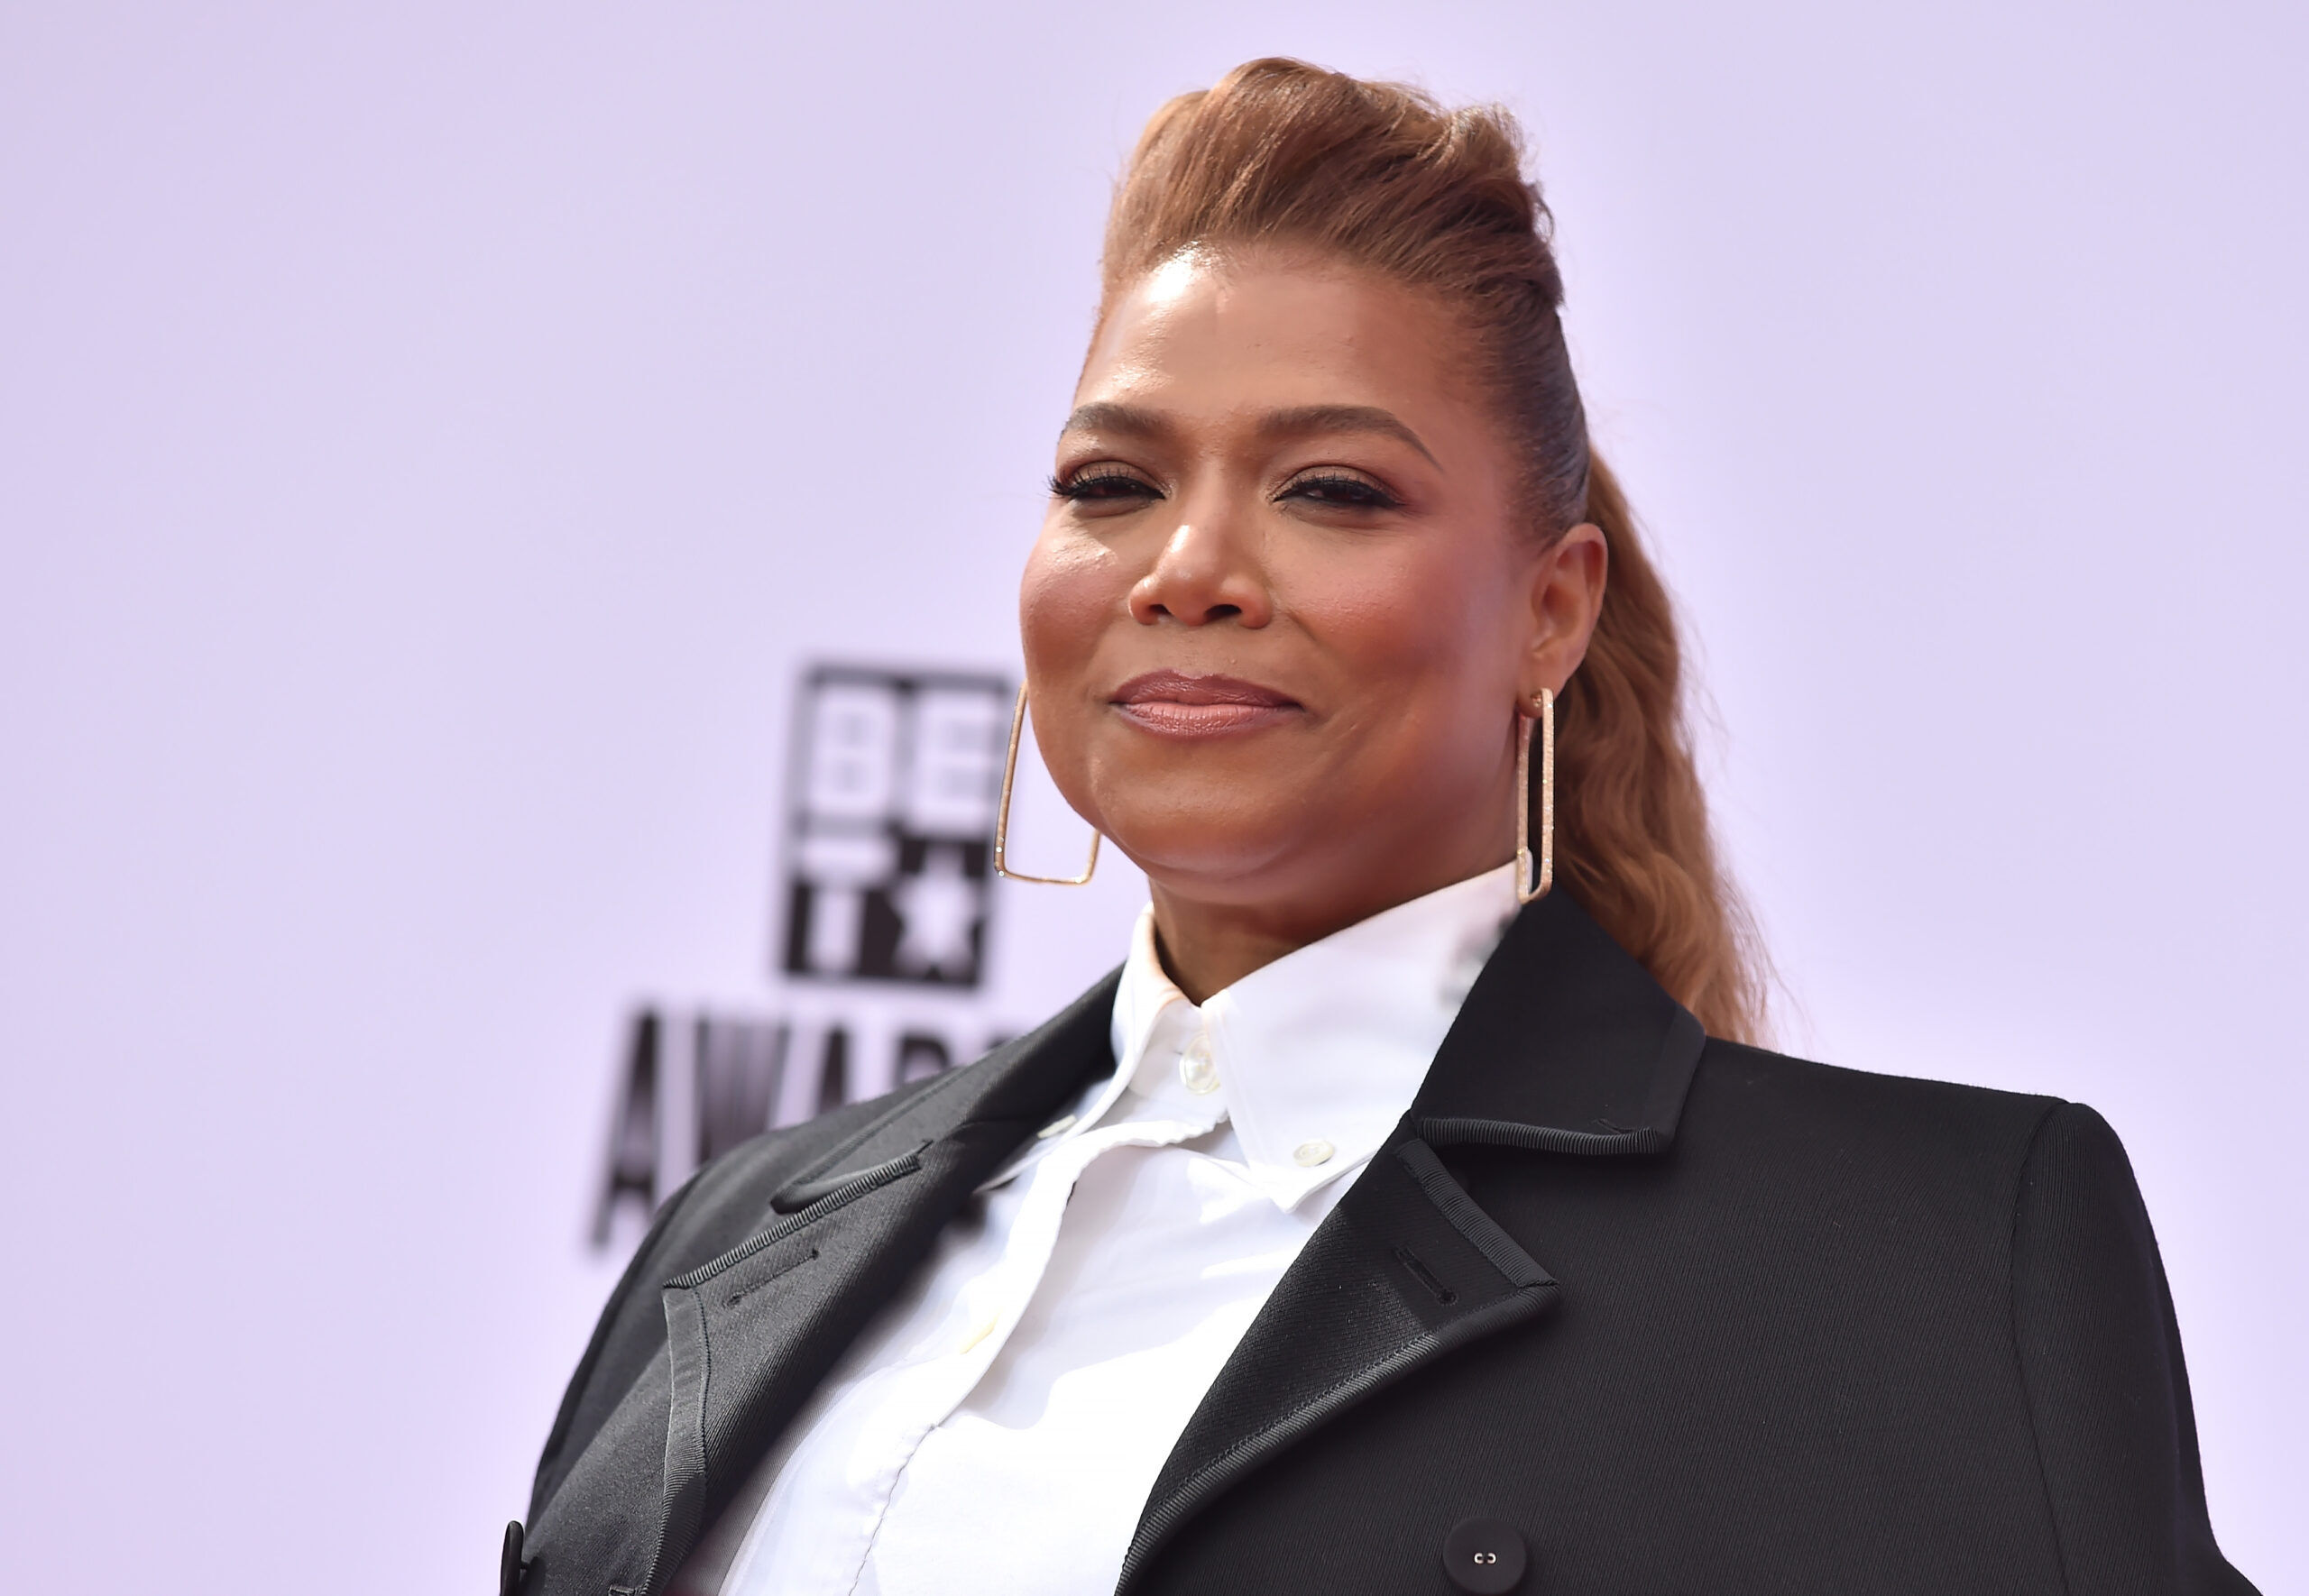 Queen Latifah on June 27, 2021 at the BET Awards